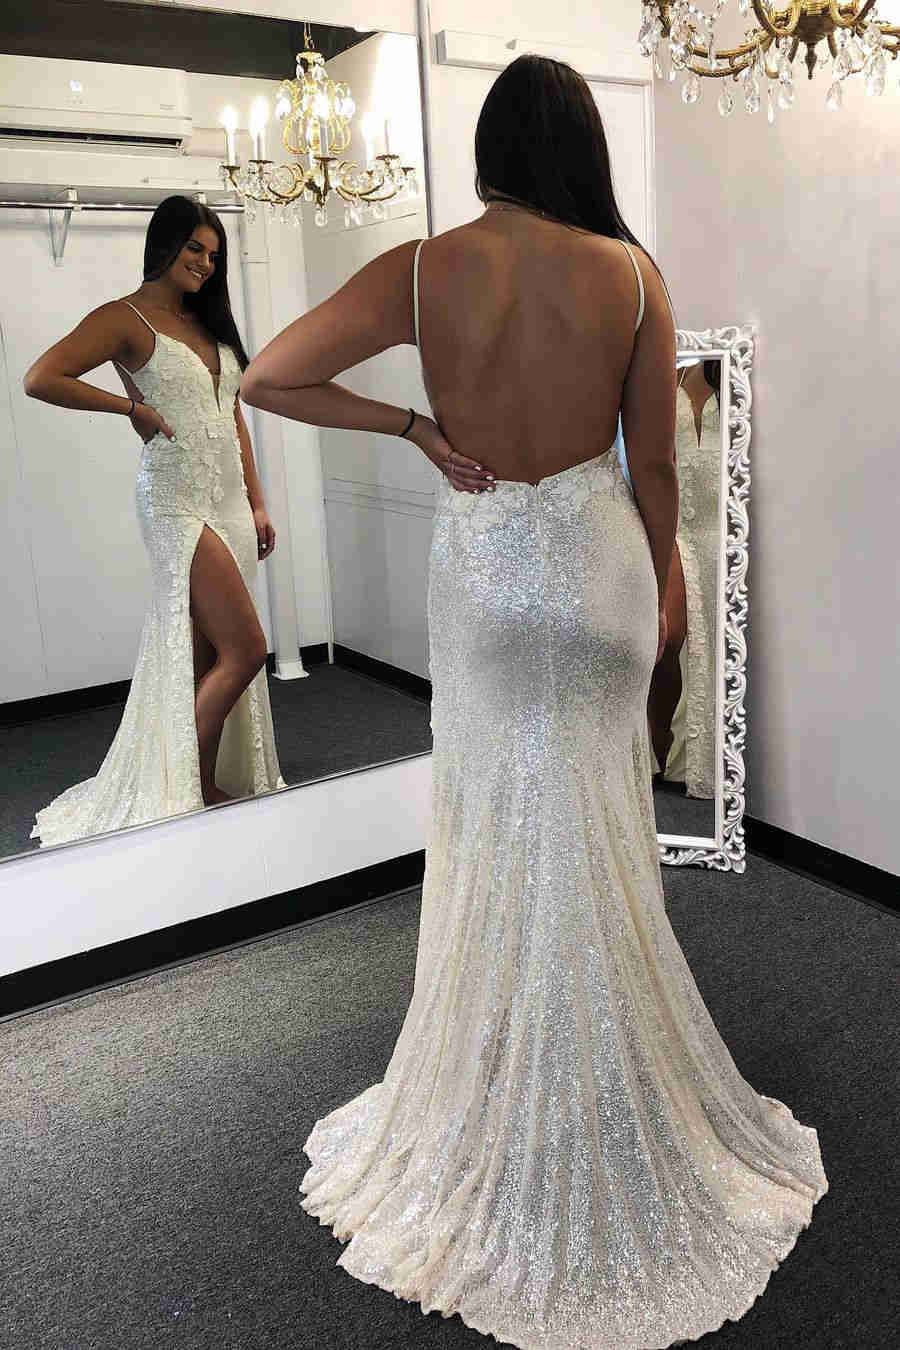 True Violet Bridal heart cut-out backless maxi dress in ivory | ASOS